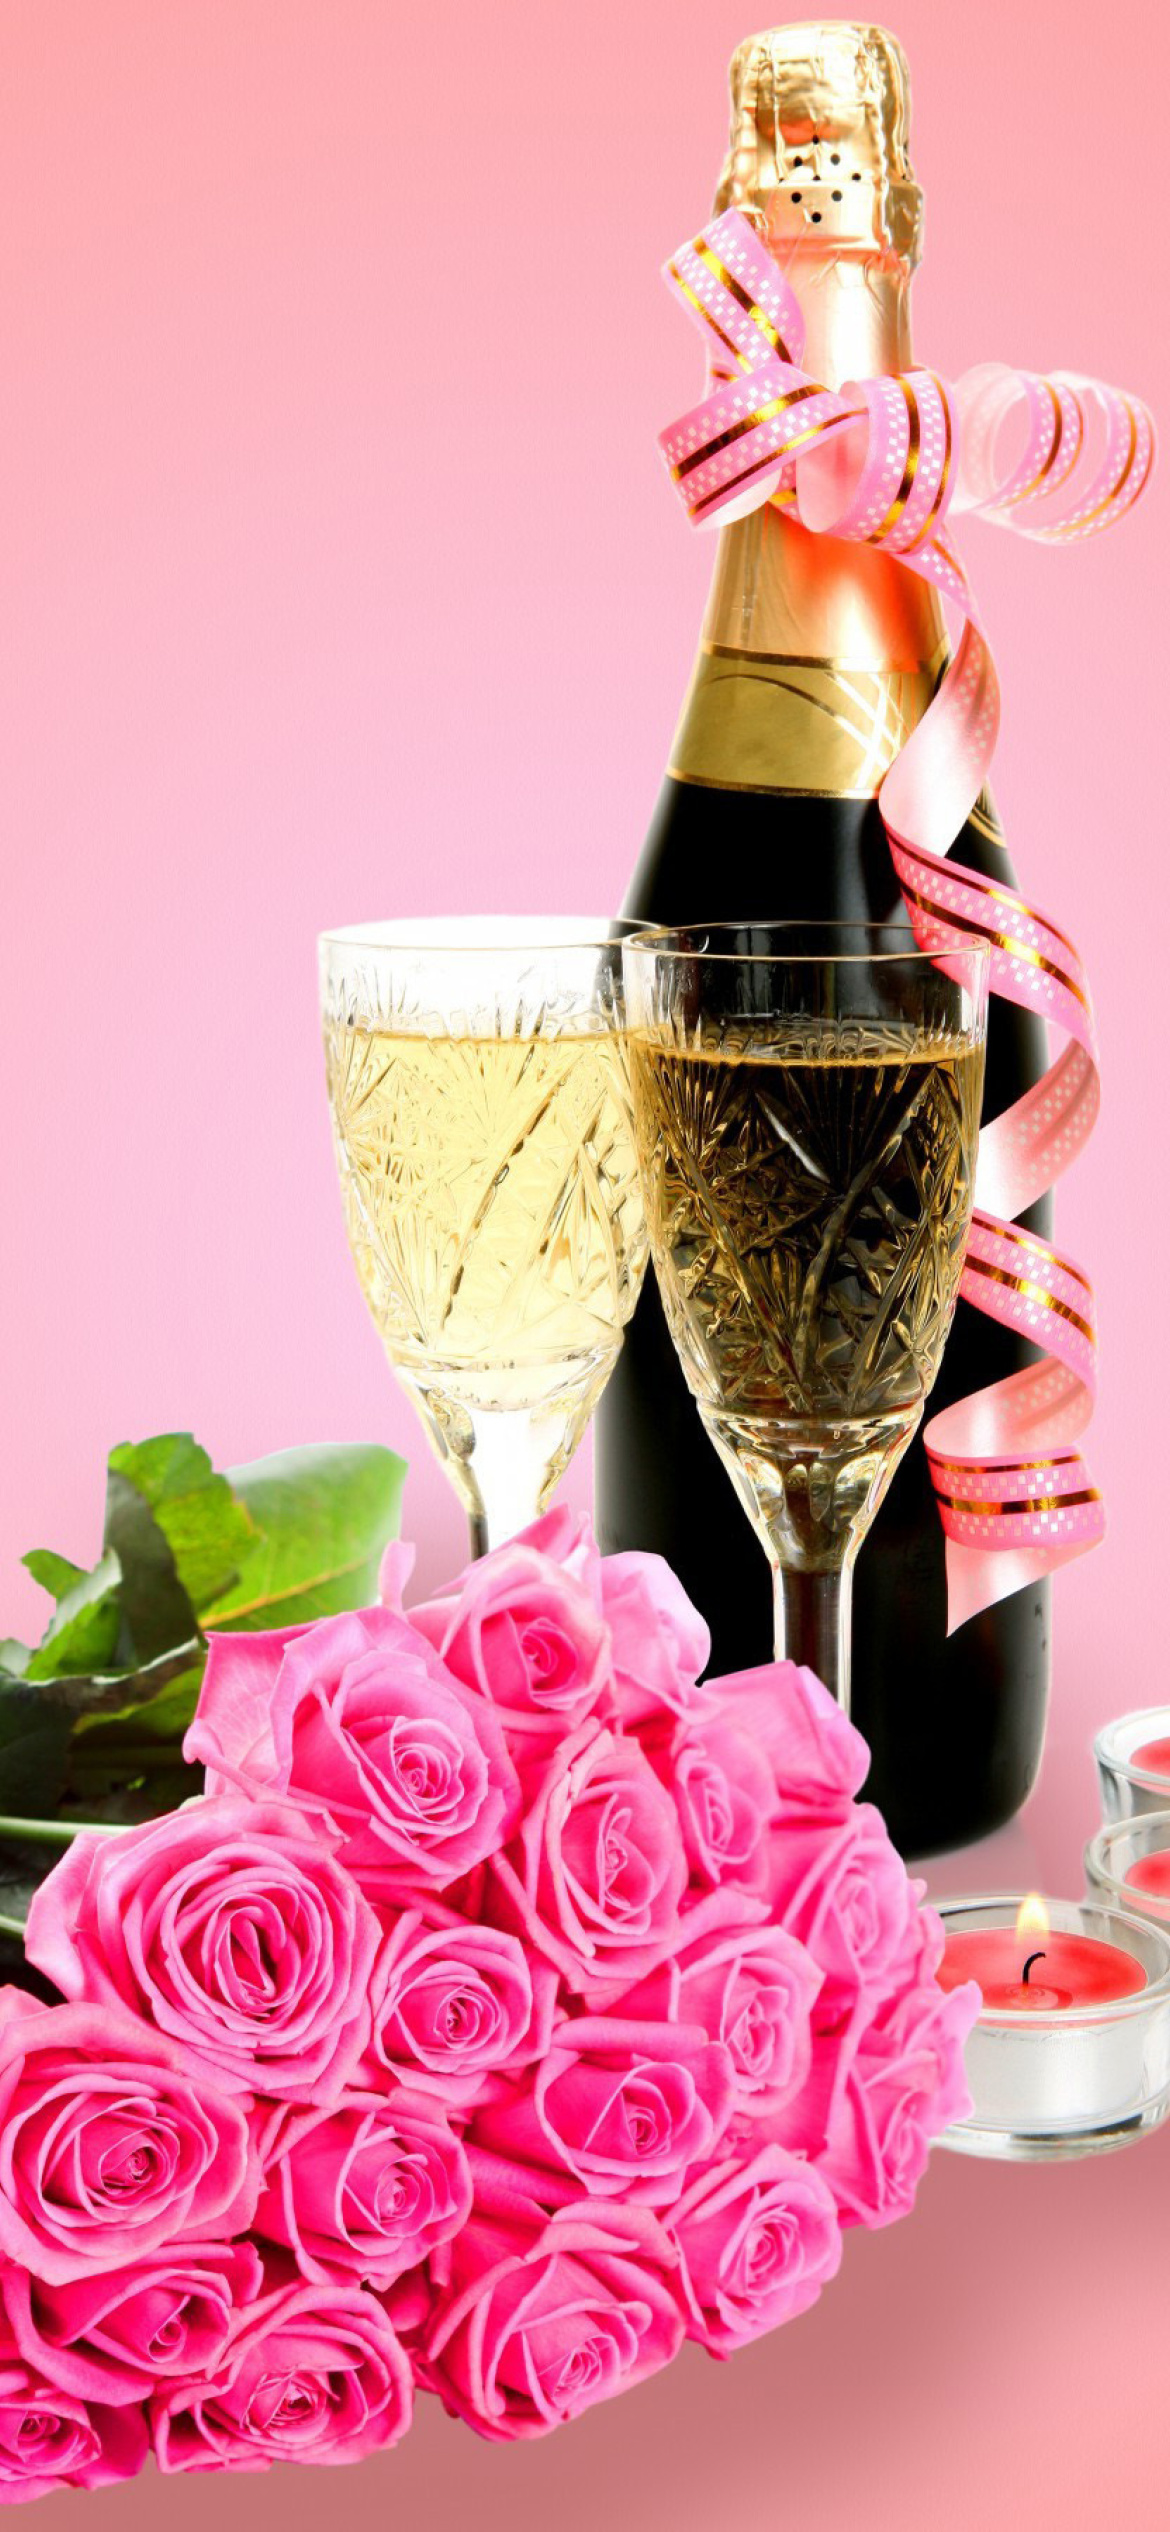 Sfondi Clipart Roses Bouquet and Champagne 1170x2532